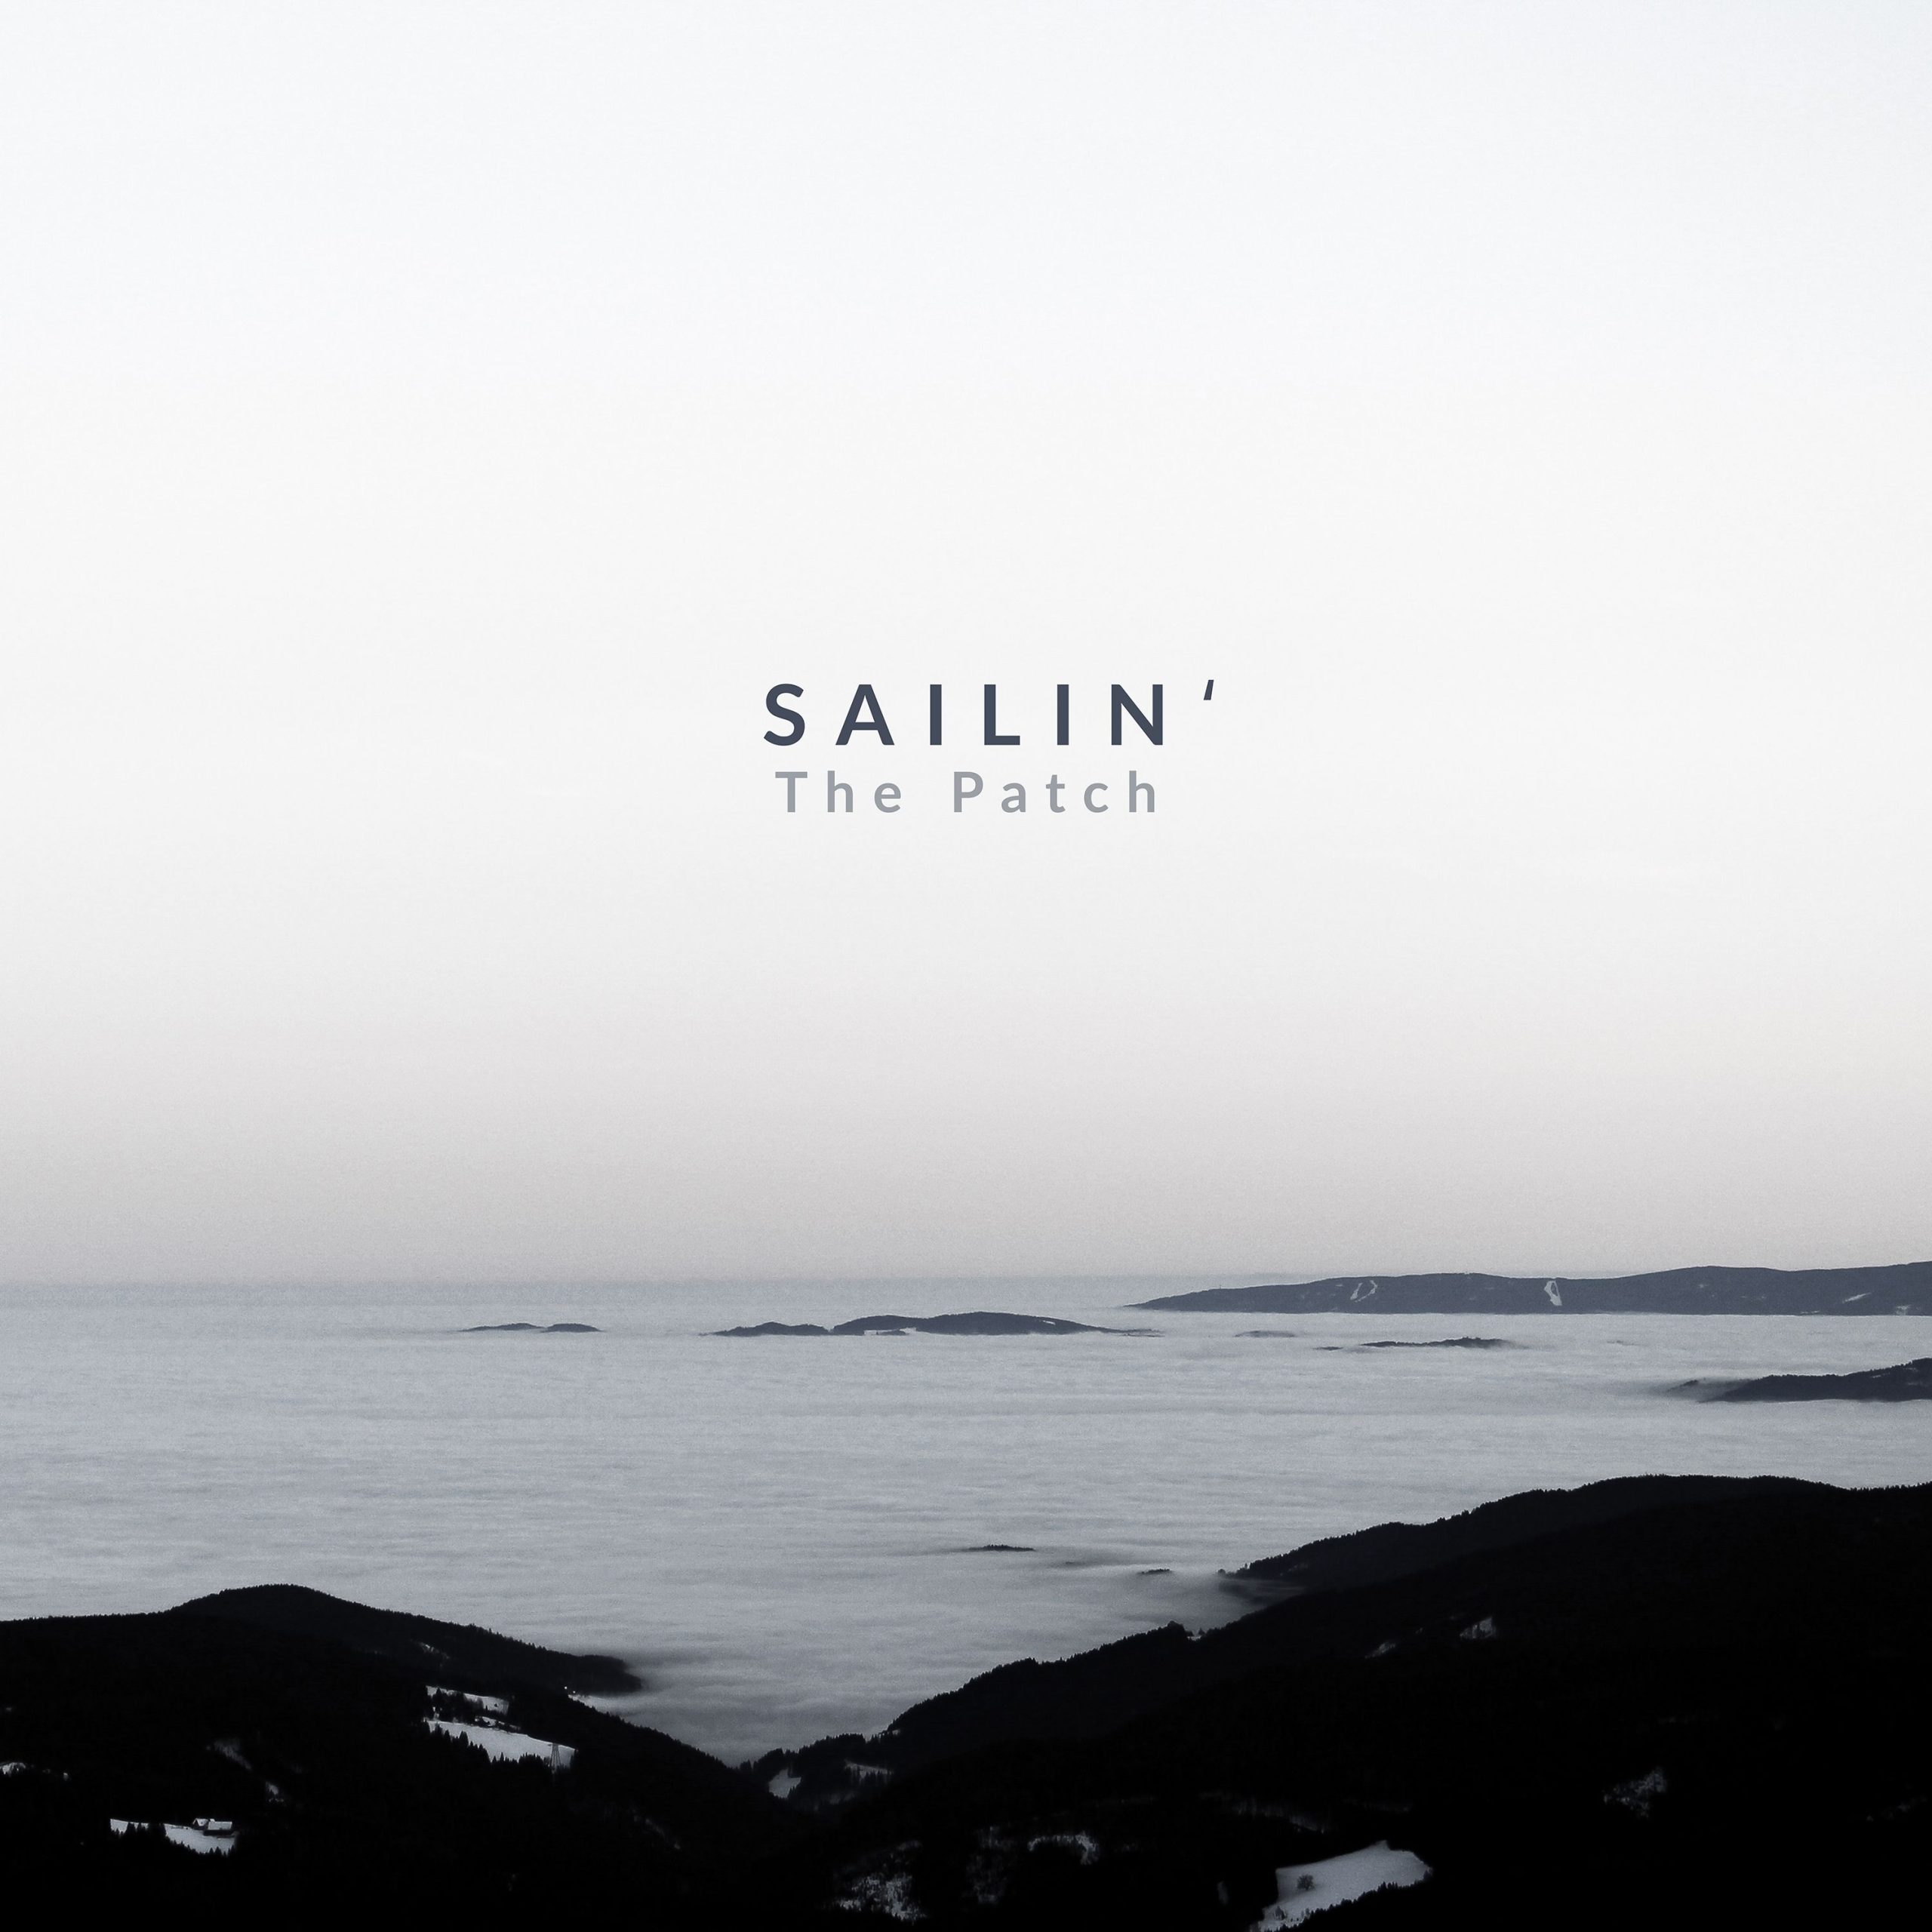 sailin - the patch - austria - indie - indie music - indie rock - new music - music blog - wolf in a suit - wolfinasuit - wolf in a suit blog - wolf in a suit music blog